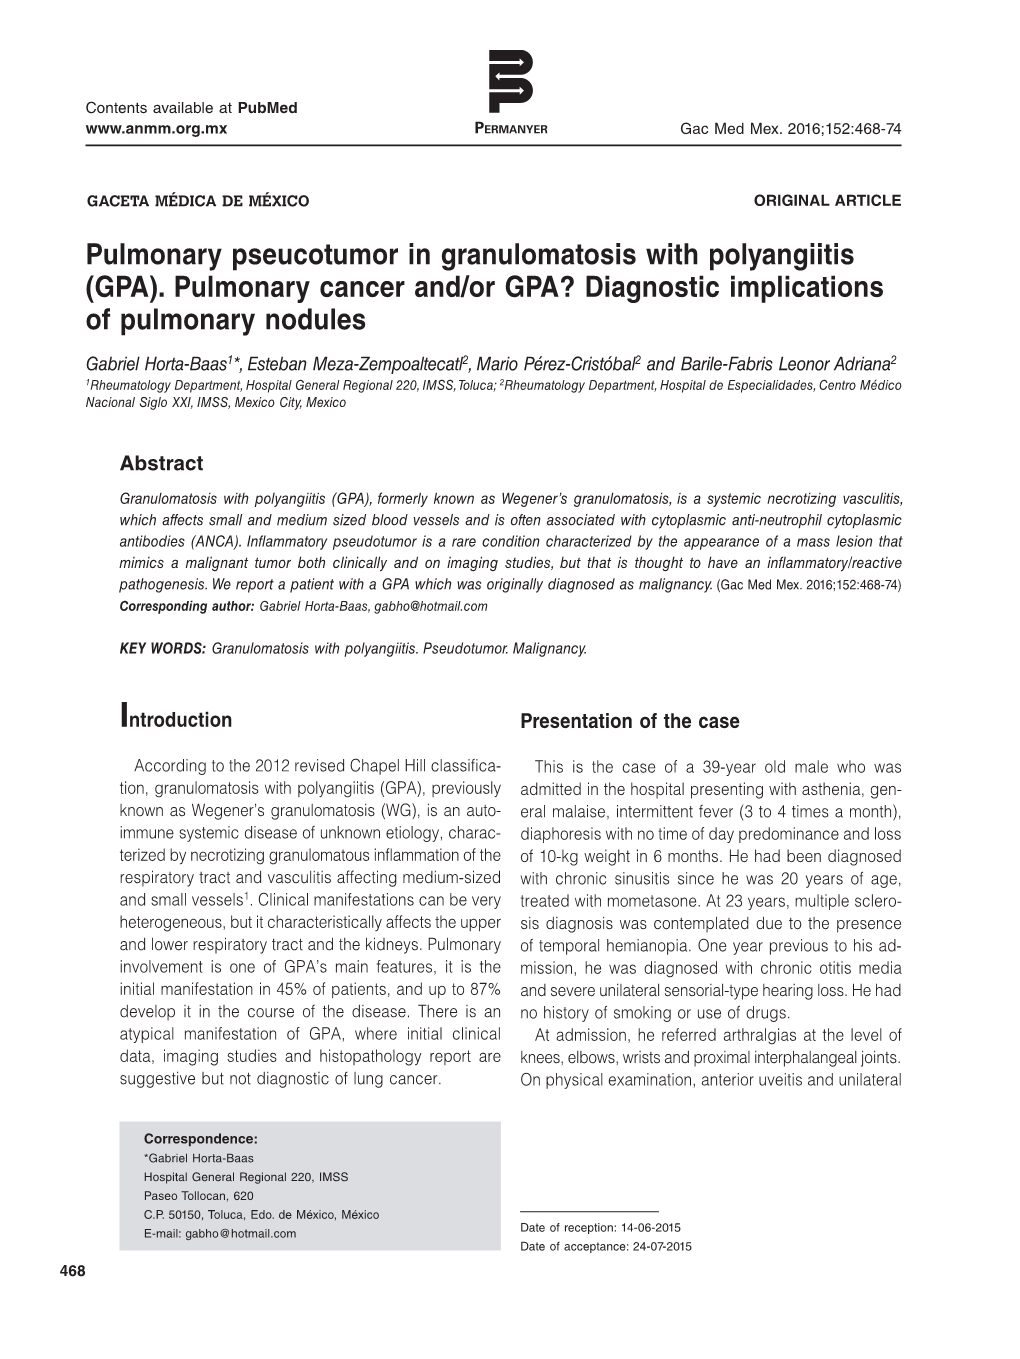 Pulmonary Cancer And/Or GPA? Diagnostic Implications of Pulmonary Nodules